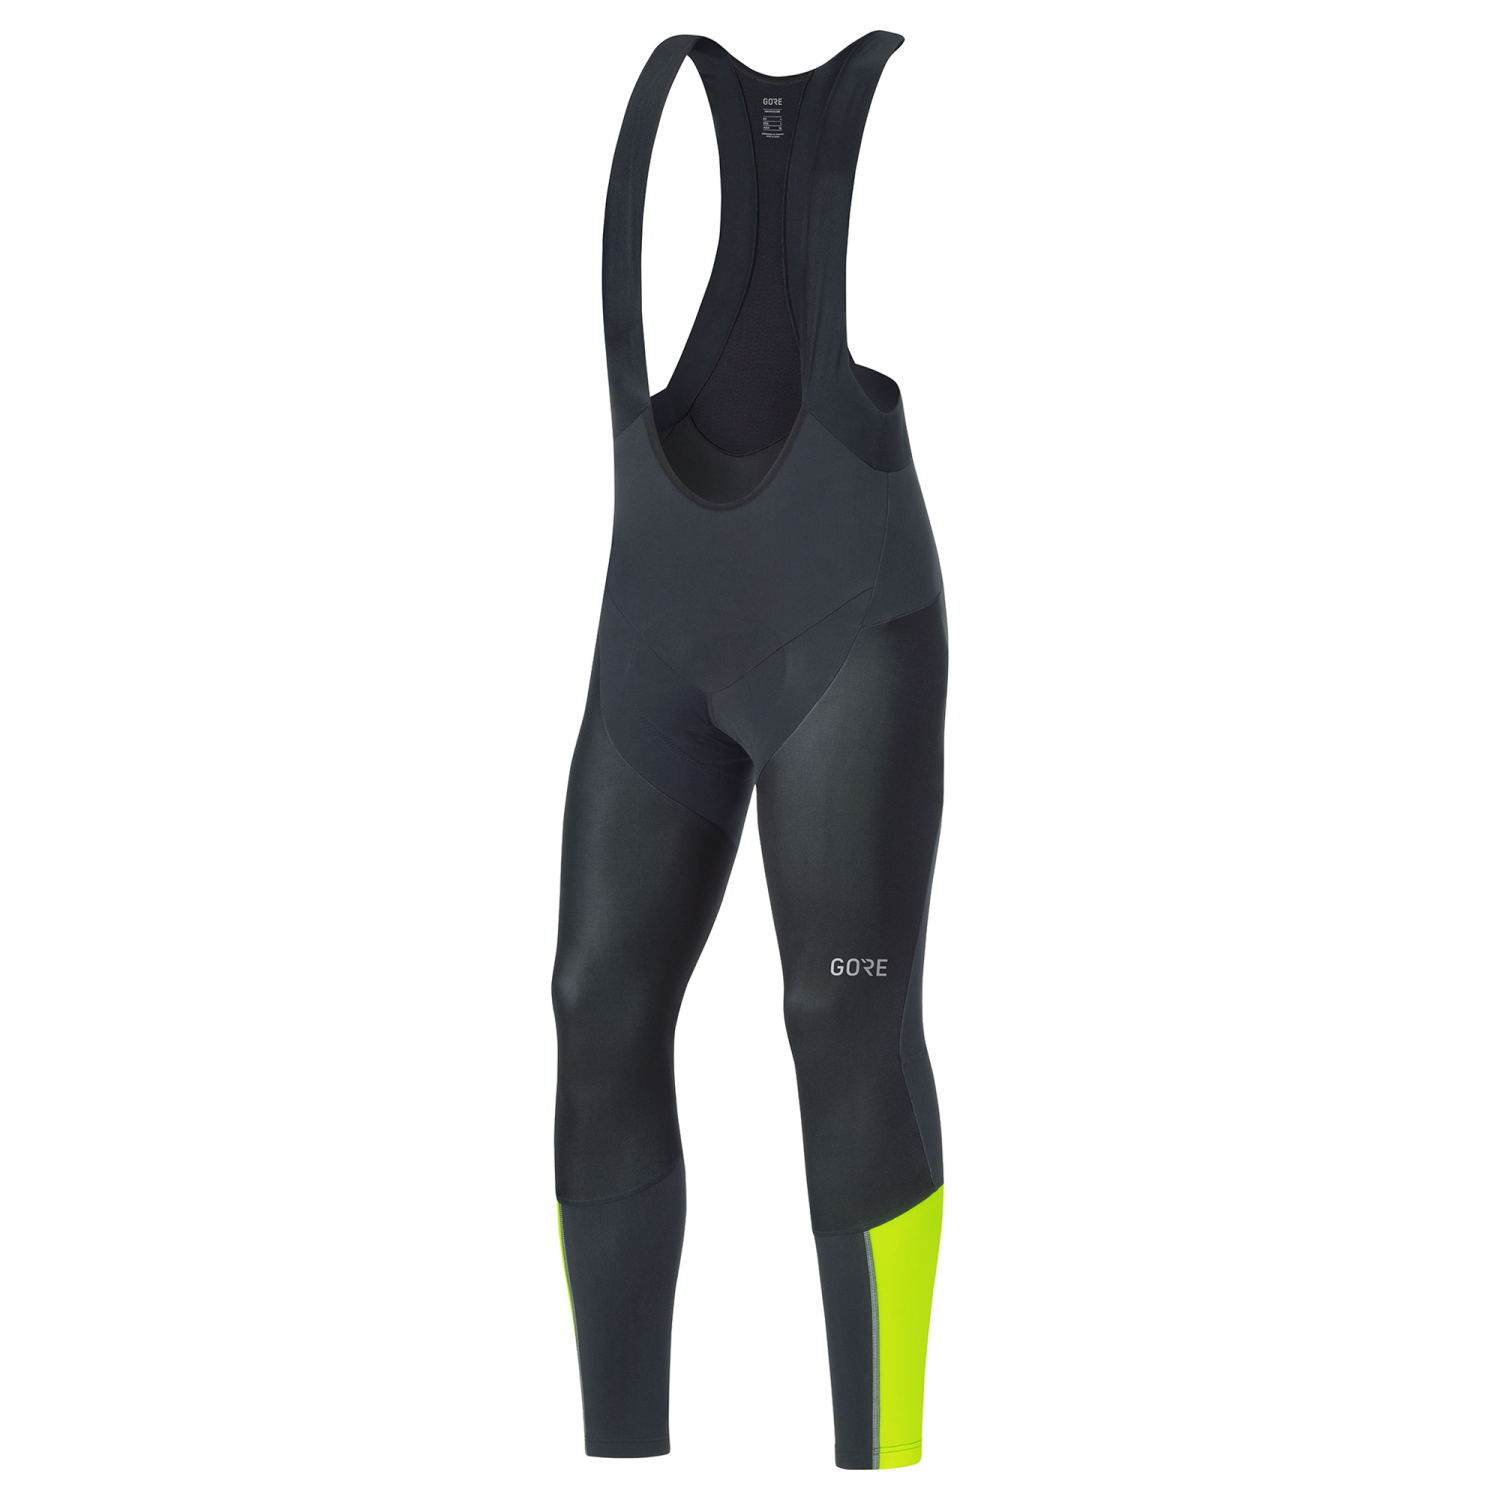 GOREWEAR Men's C7 Partial WINDSTOPPER(R) Pro Cycling Bib Tights+ in Black/Neon Yellow | XL | Form fit | Windproof